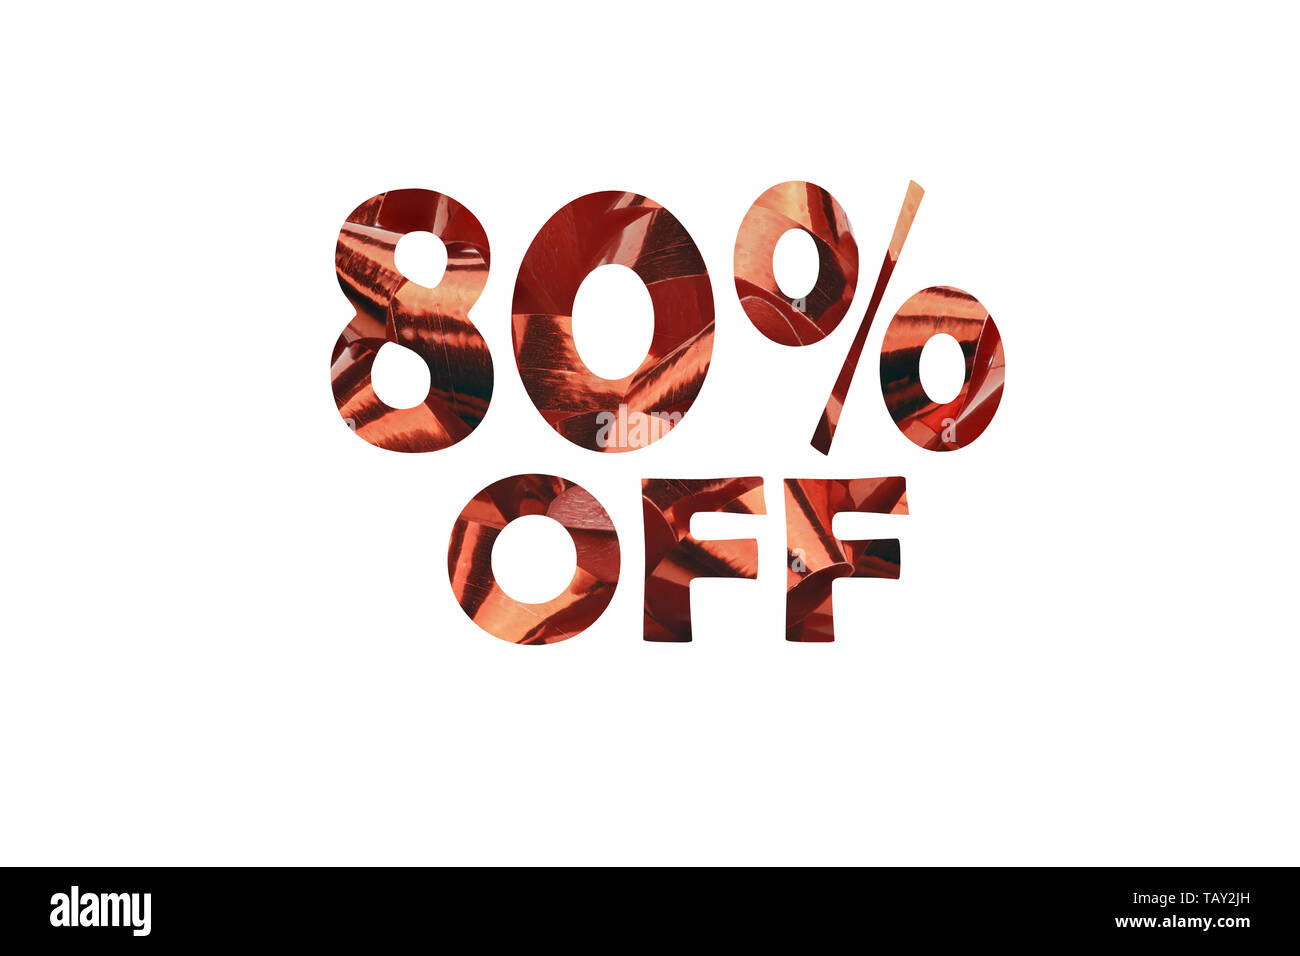 80 percent off symbolically represented with cut out text 80% off Stock Photo